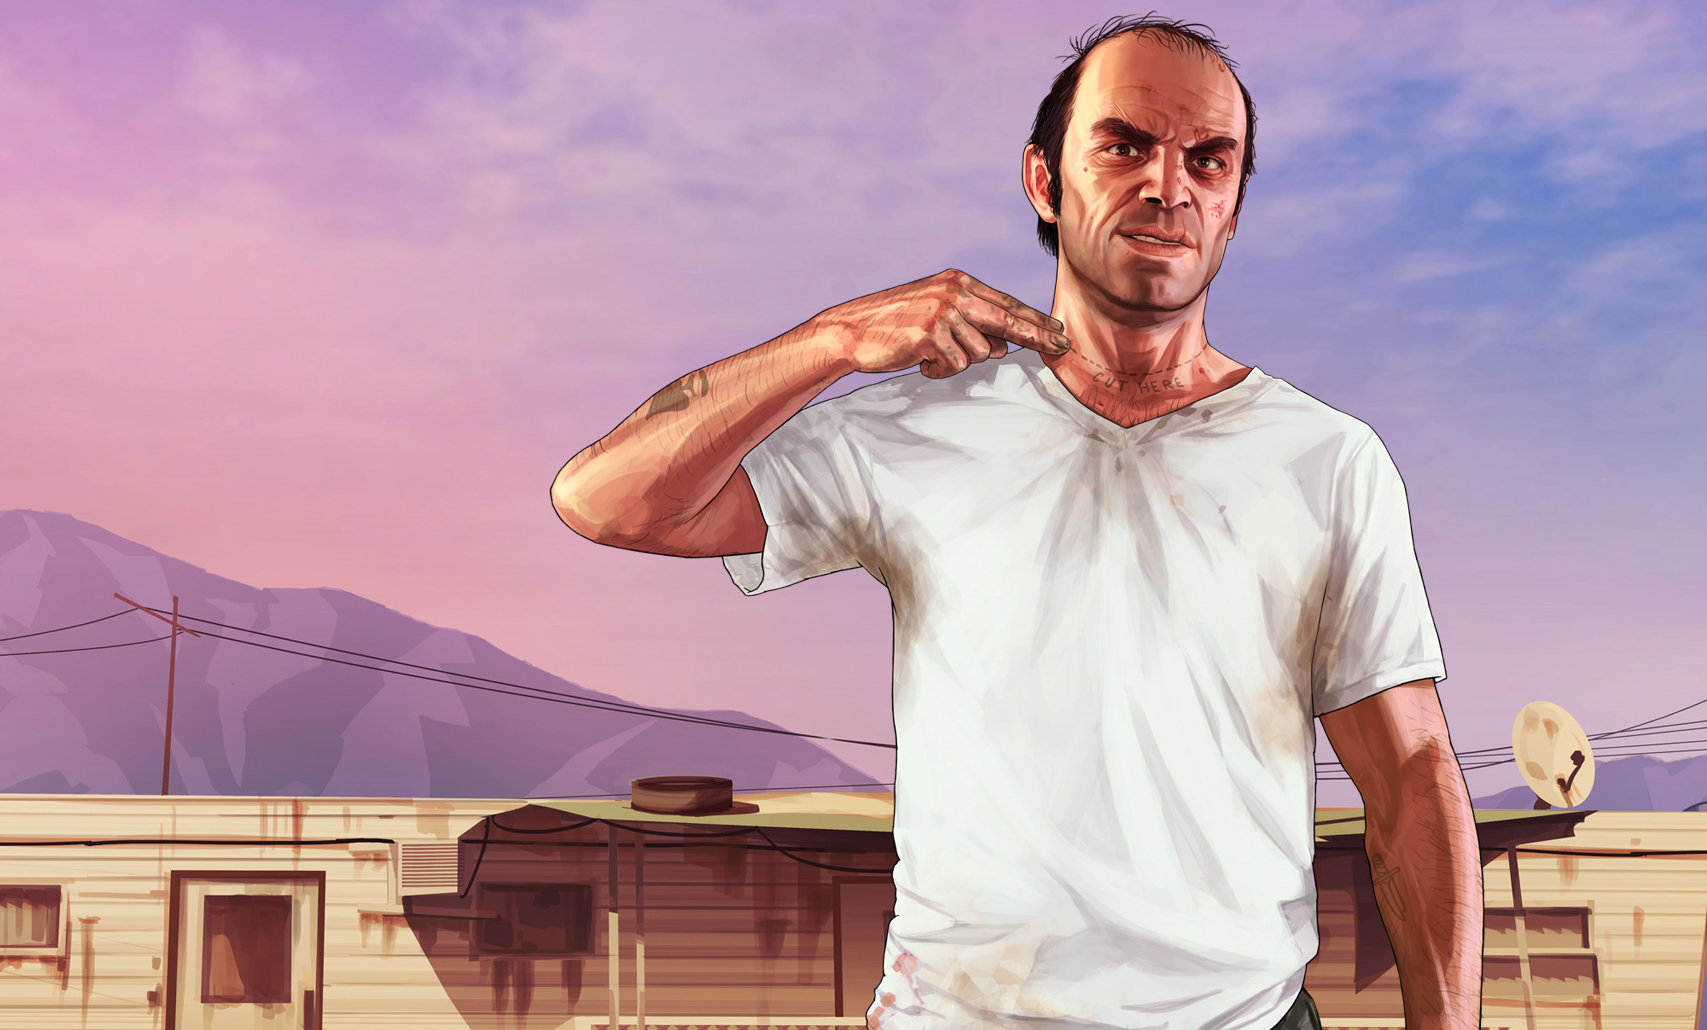 Grand Theft Auto 5 actor ‘shot some stuff’ with Rockstar for a ‘James Bond Trevor’ expansion that never happened